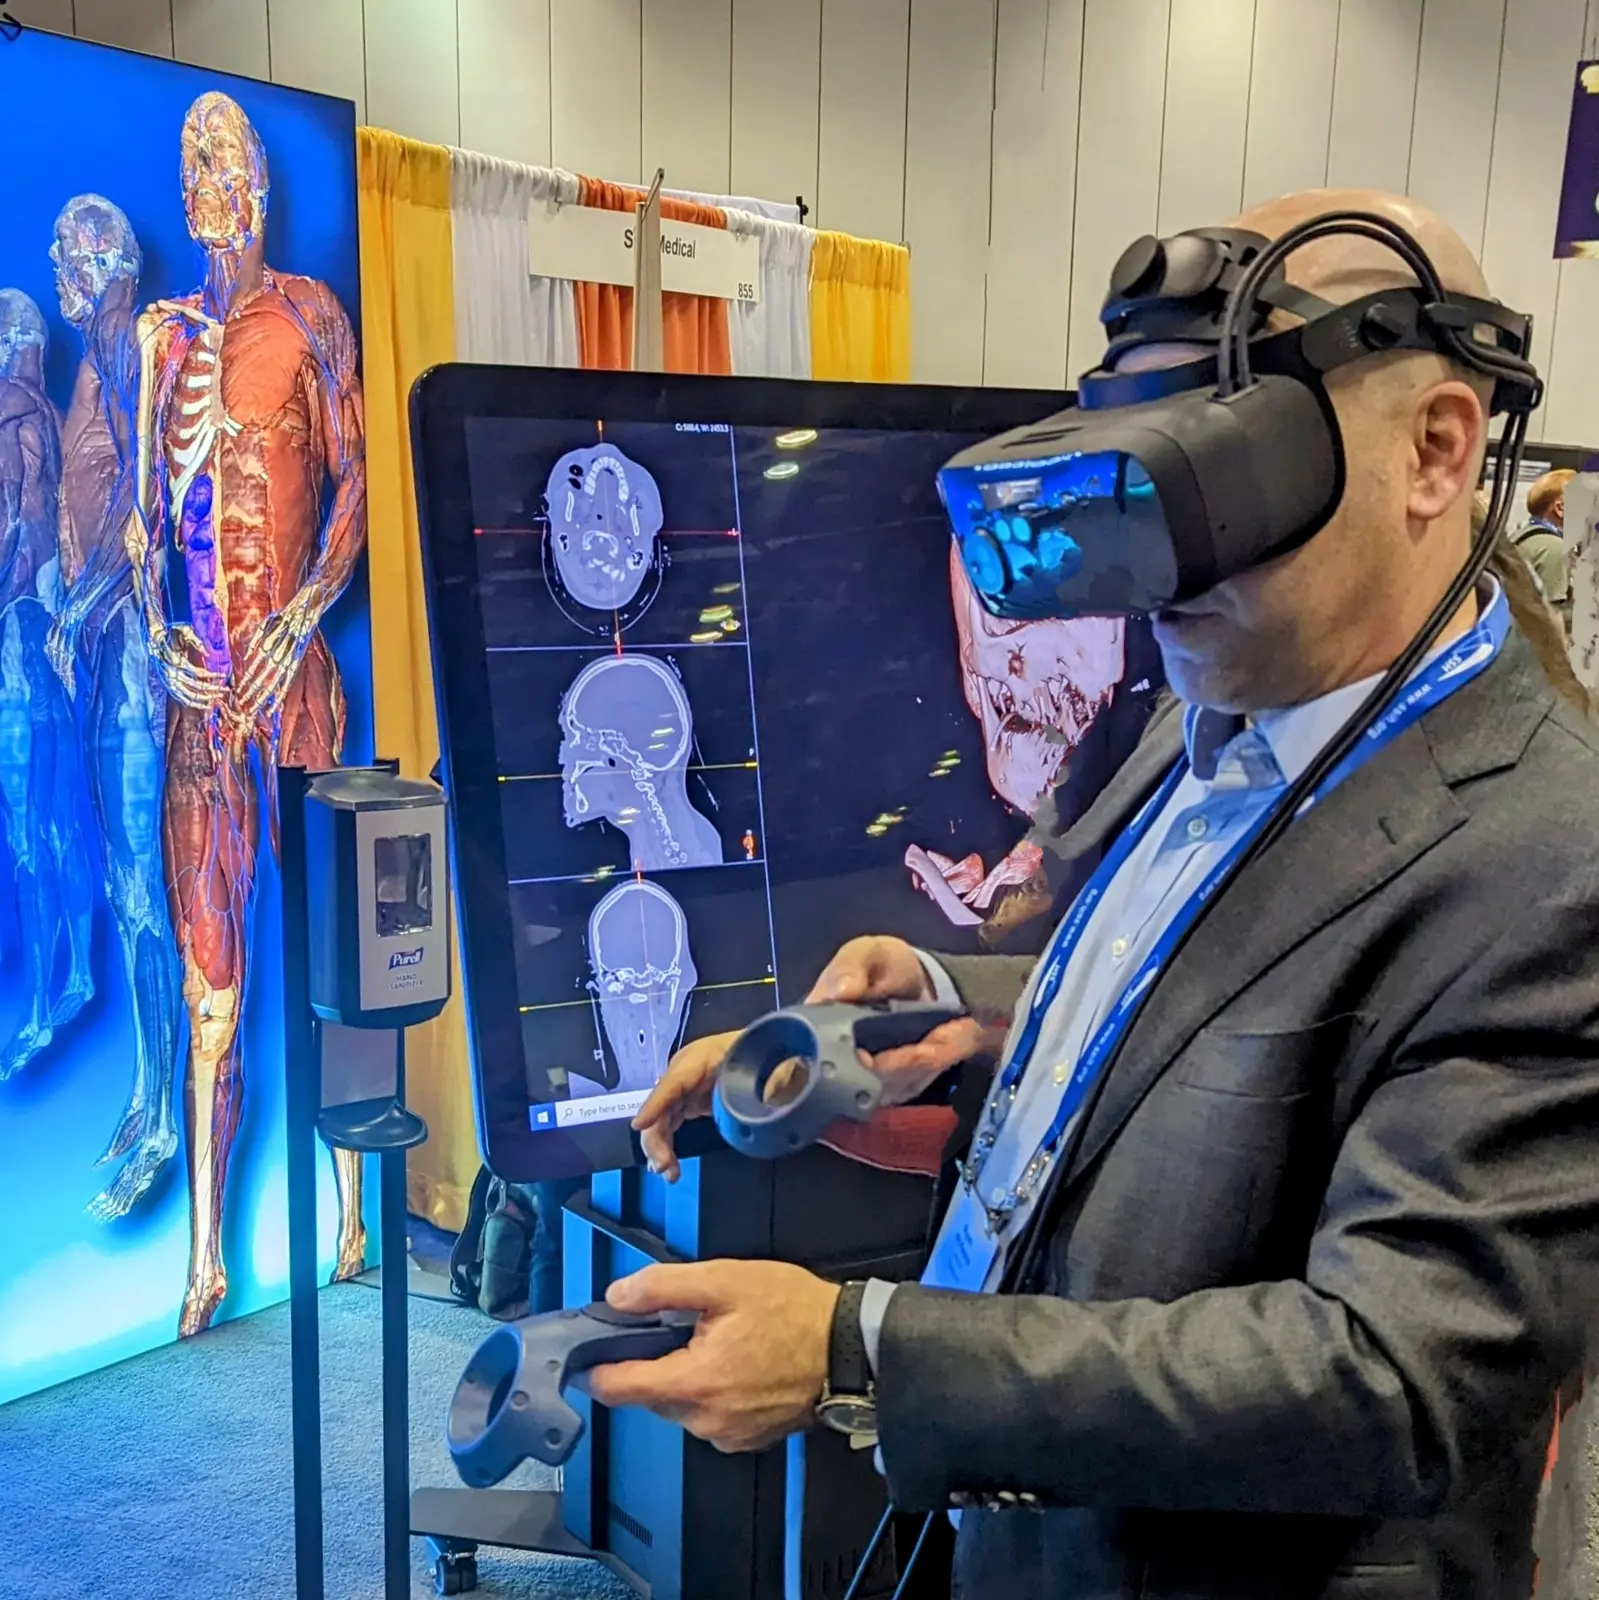 CAMLS A man wearing a suit and virtual reality headset uses VR controllers at a tech exhibition. Behind him, a large screen displays digital human anatomy images. An anatomical model with transparent layers is visible on a display board to the left.